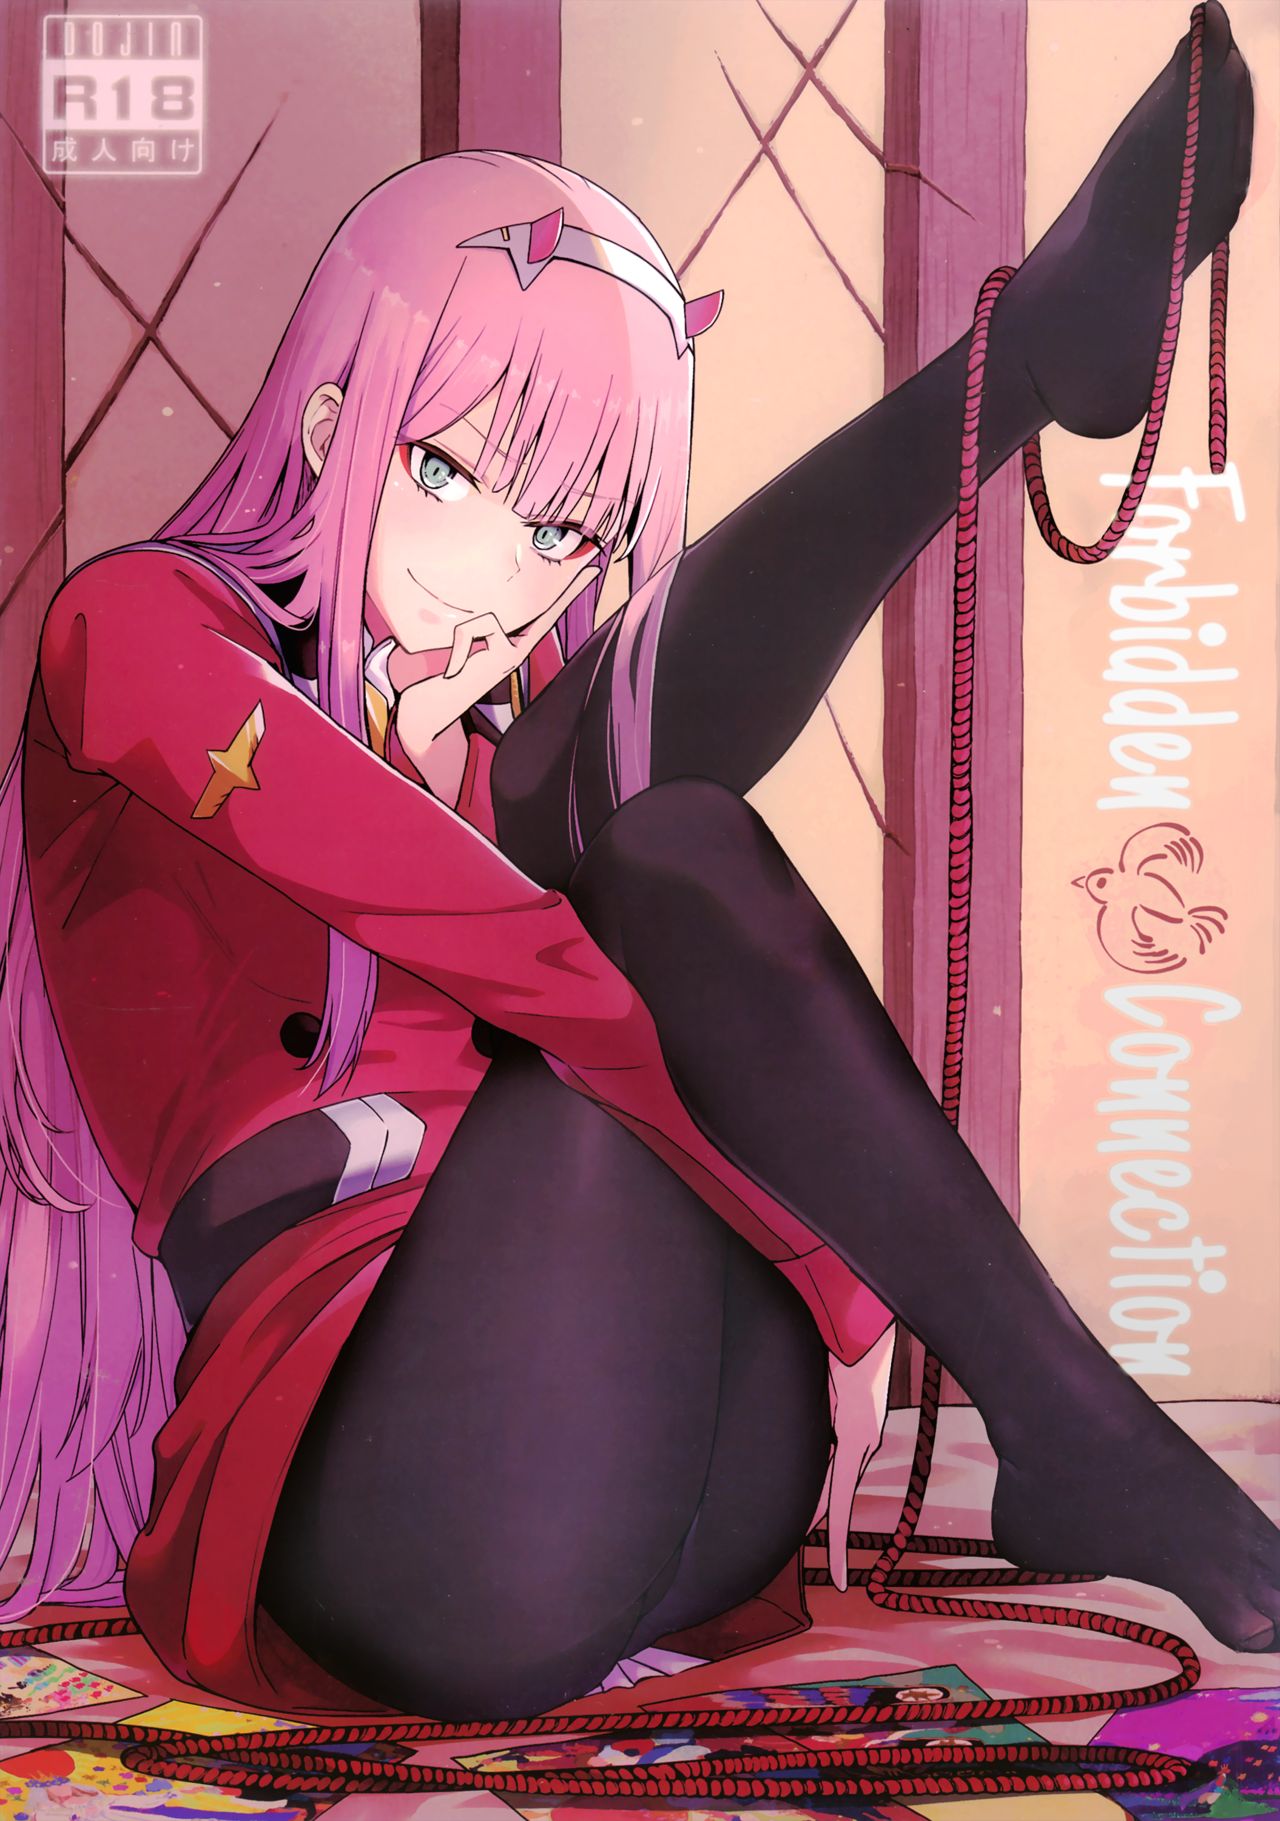 Darling in the frankxx porn